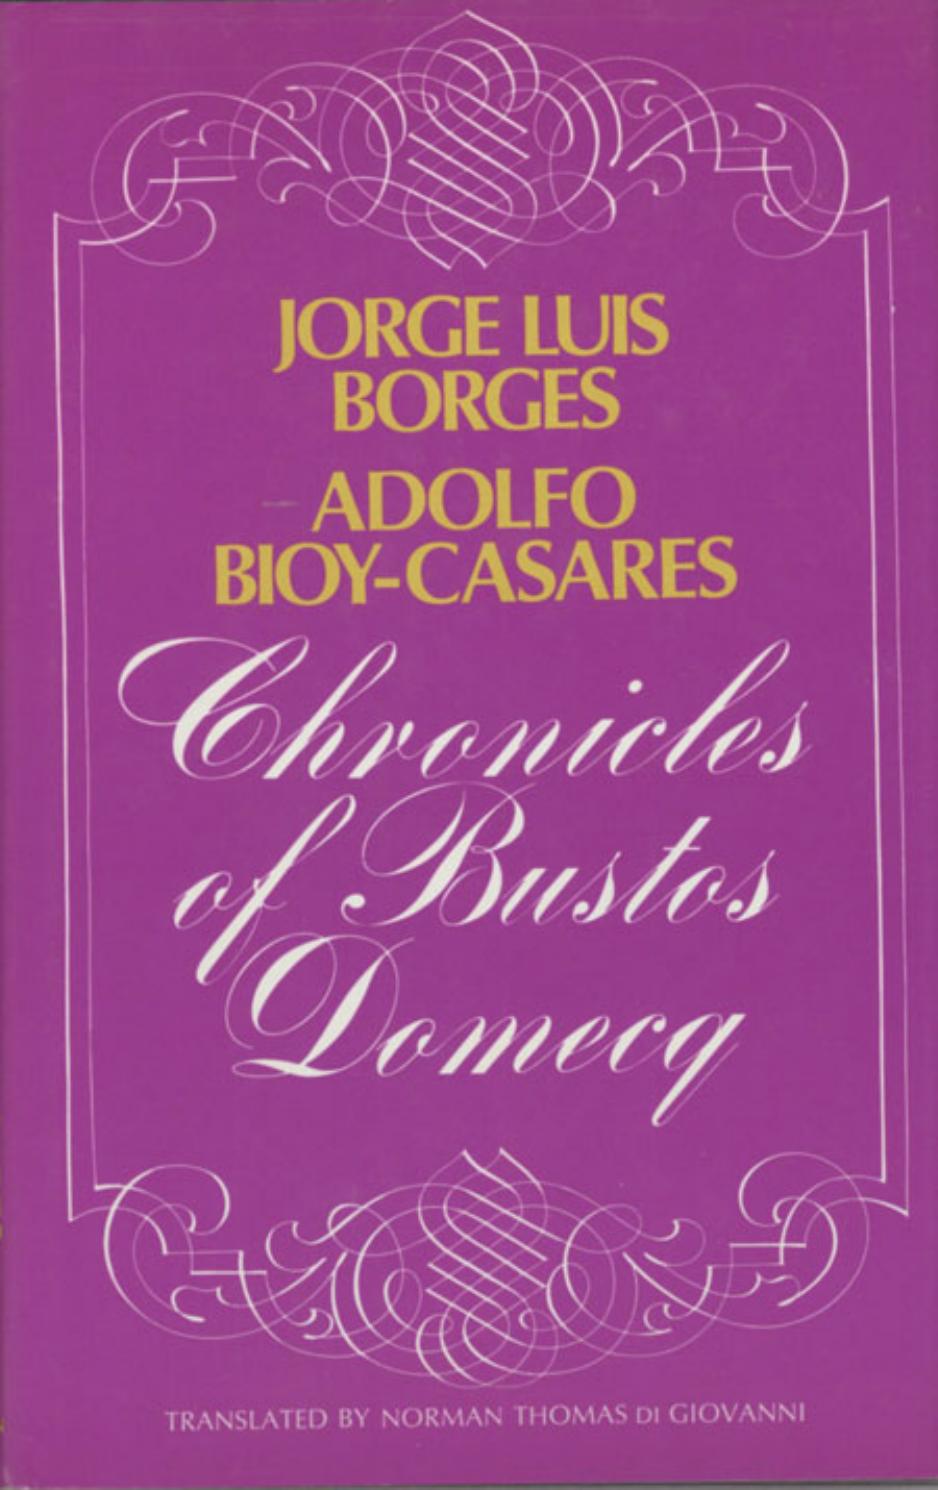 Chronicles of Bustos Domecq